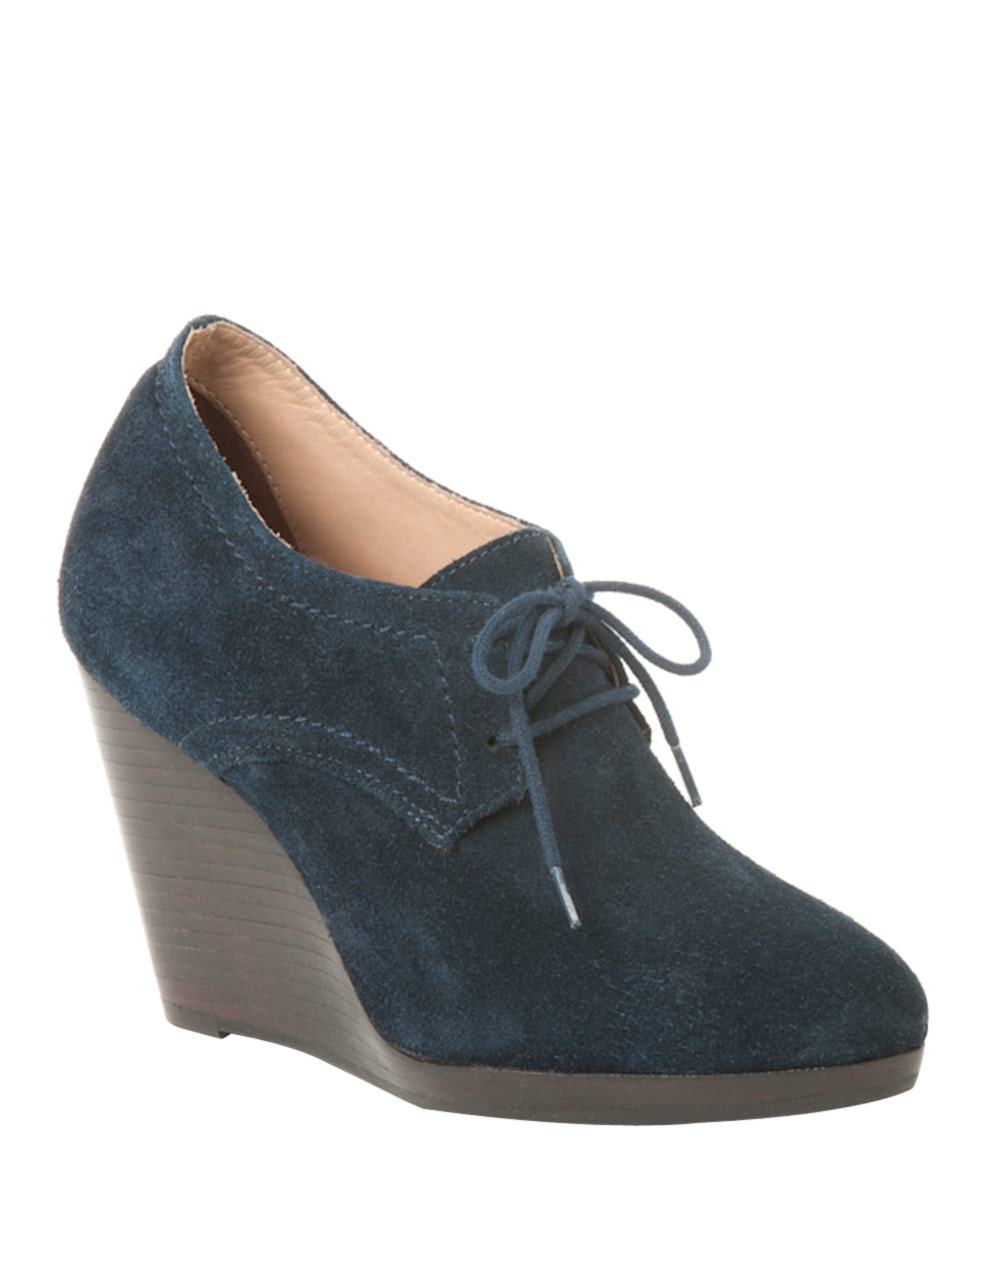 Lyst - Jack rogers Pima Suede Lace-up Wedge Booties in Blue